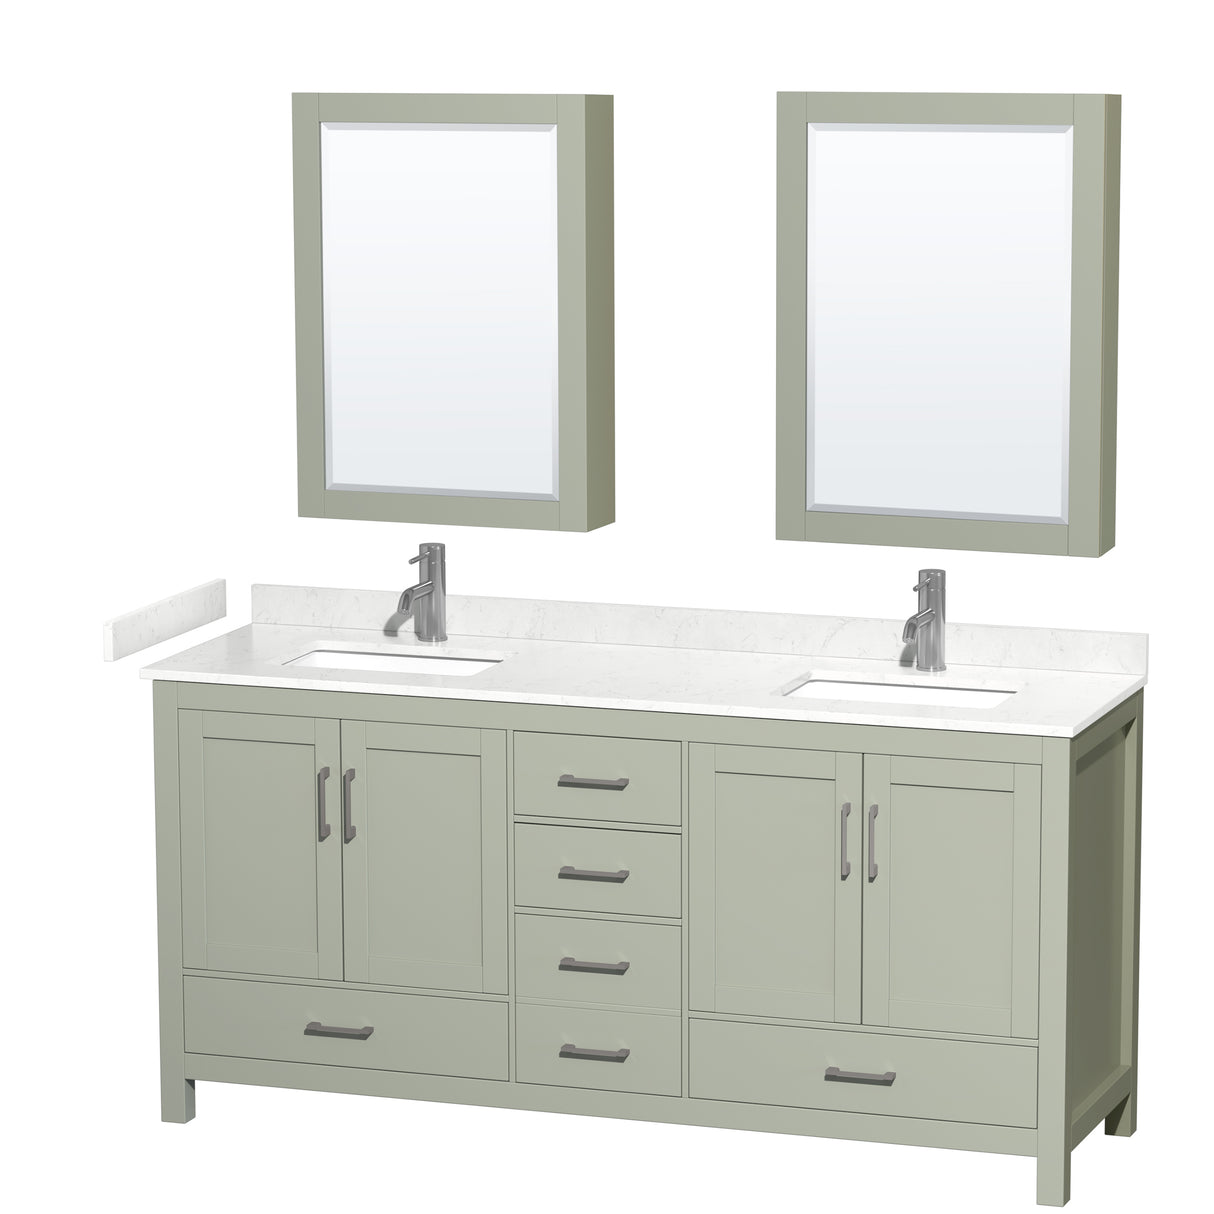 Sheffield 72 inch Double Bathroom Vanity in Light Green Carrara Cultured Marble Countertop Undermount Square Sinks Brushed Nickel Trim Medicine Cabinets